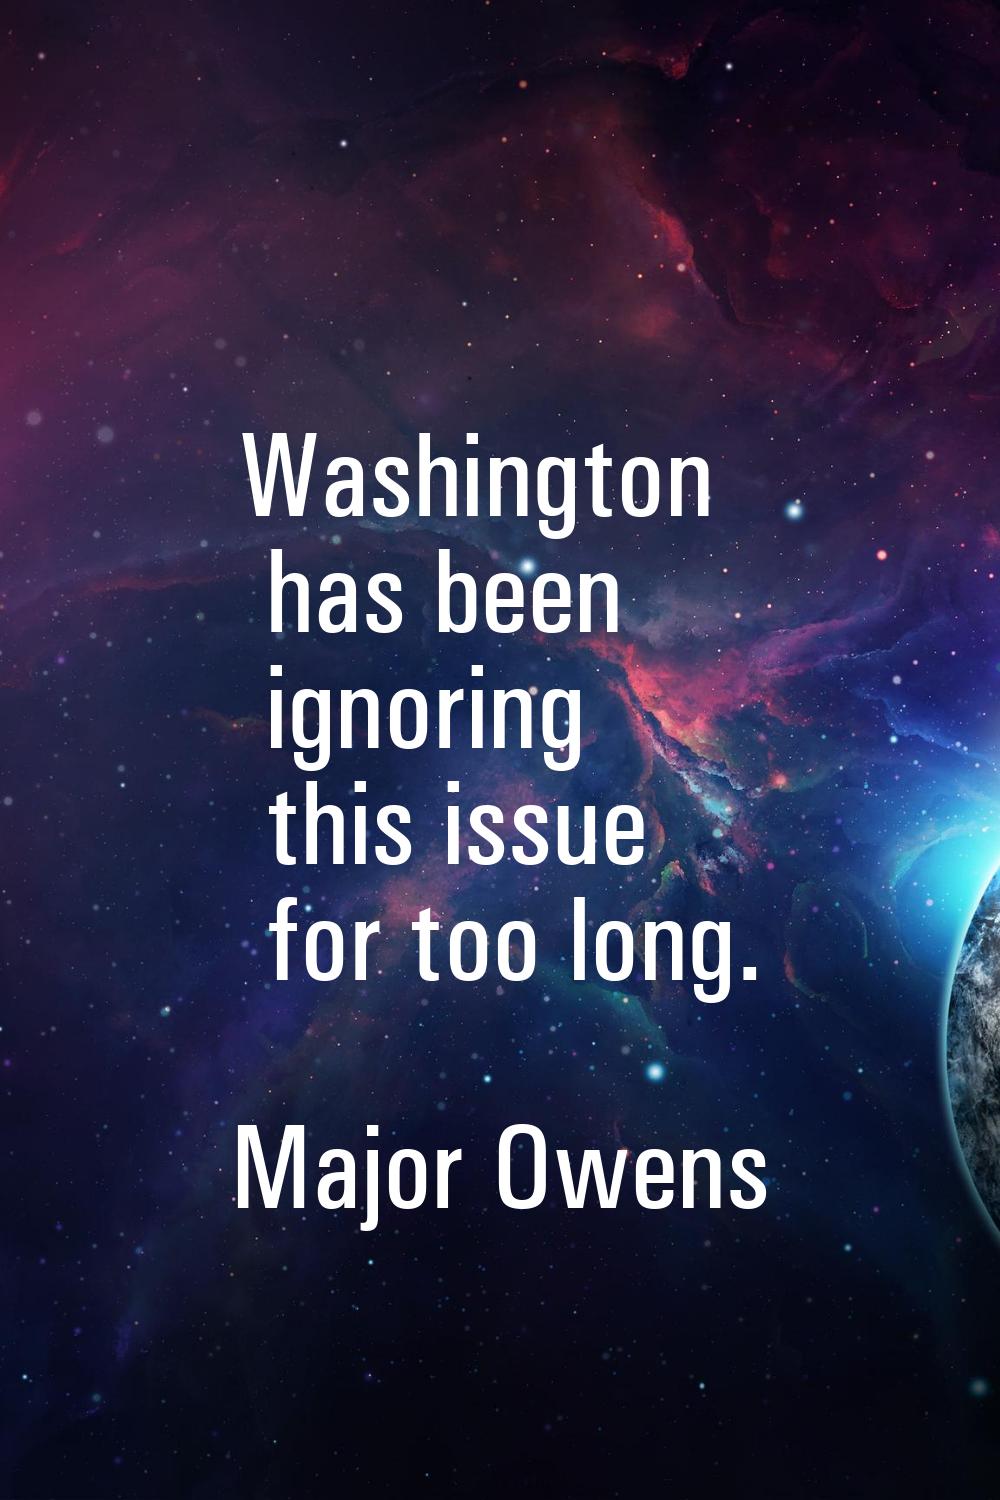 Washington has been ignoring this issue for too long.